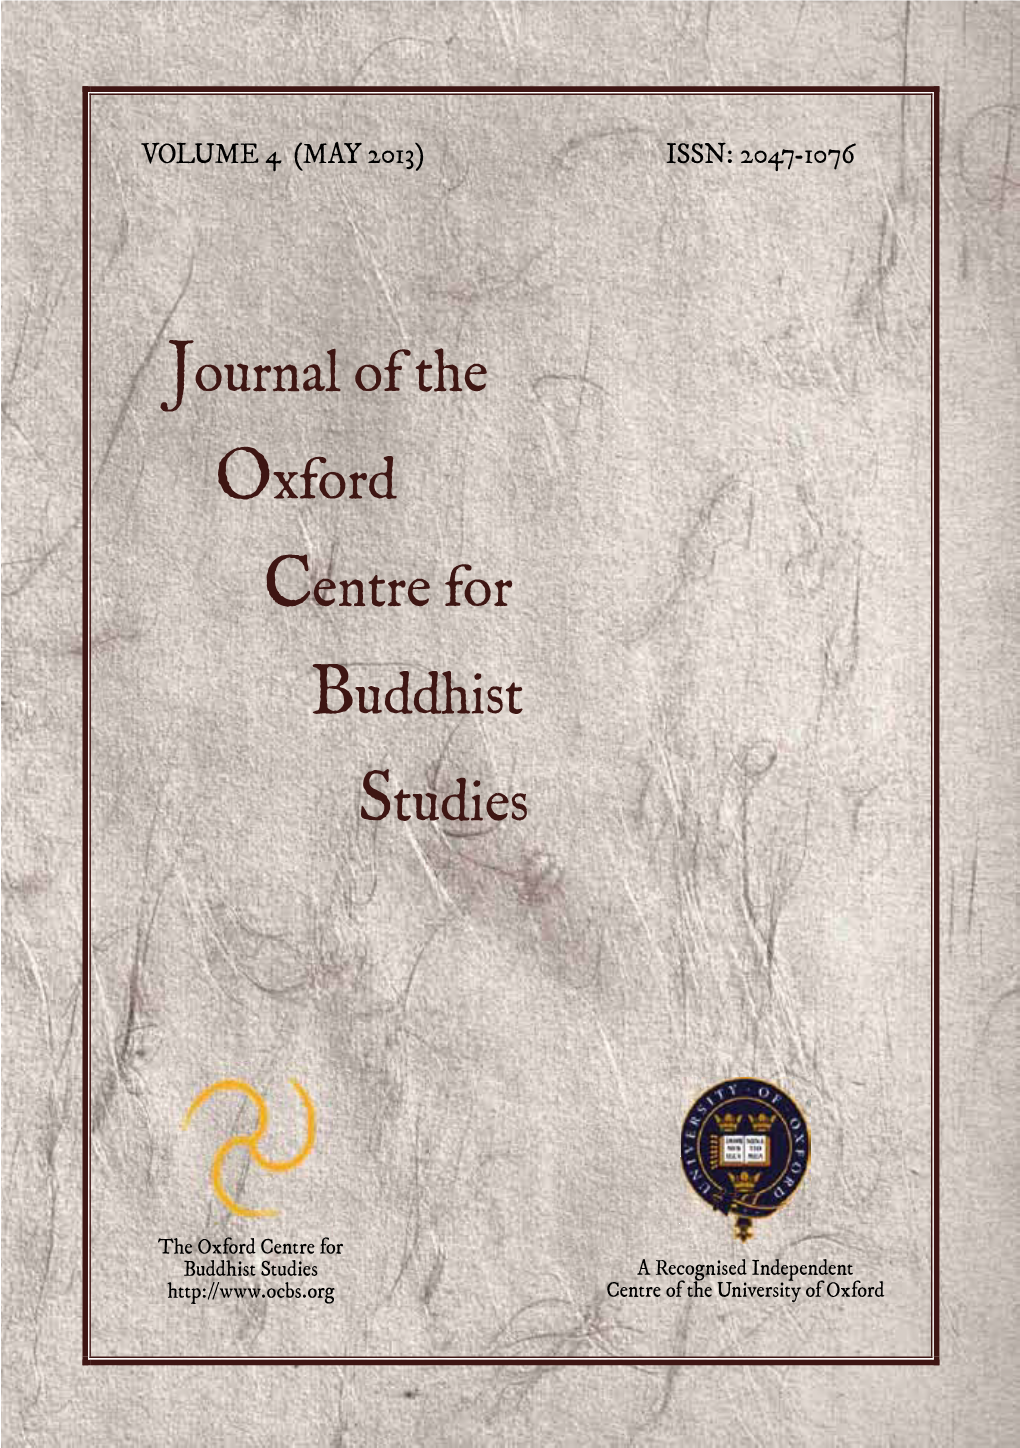 Journal of the Oxford Centre for Buddhist Studies, Vol. 4, May 2013